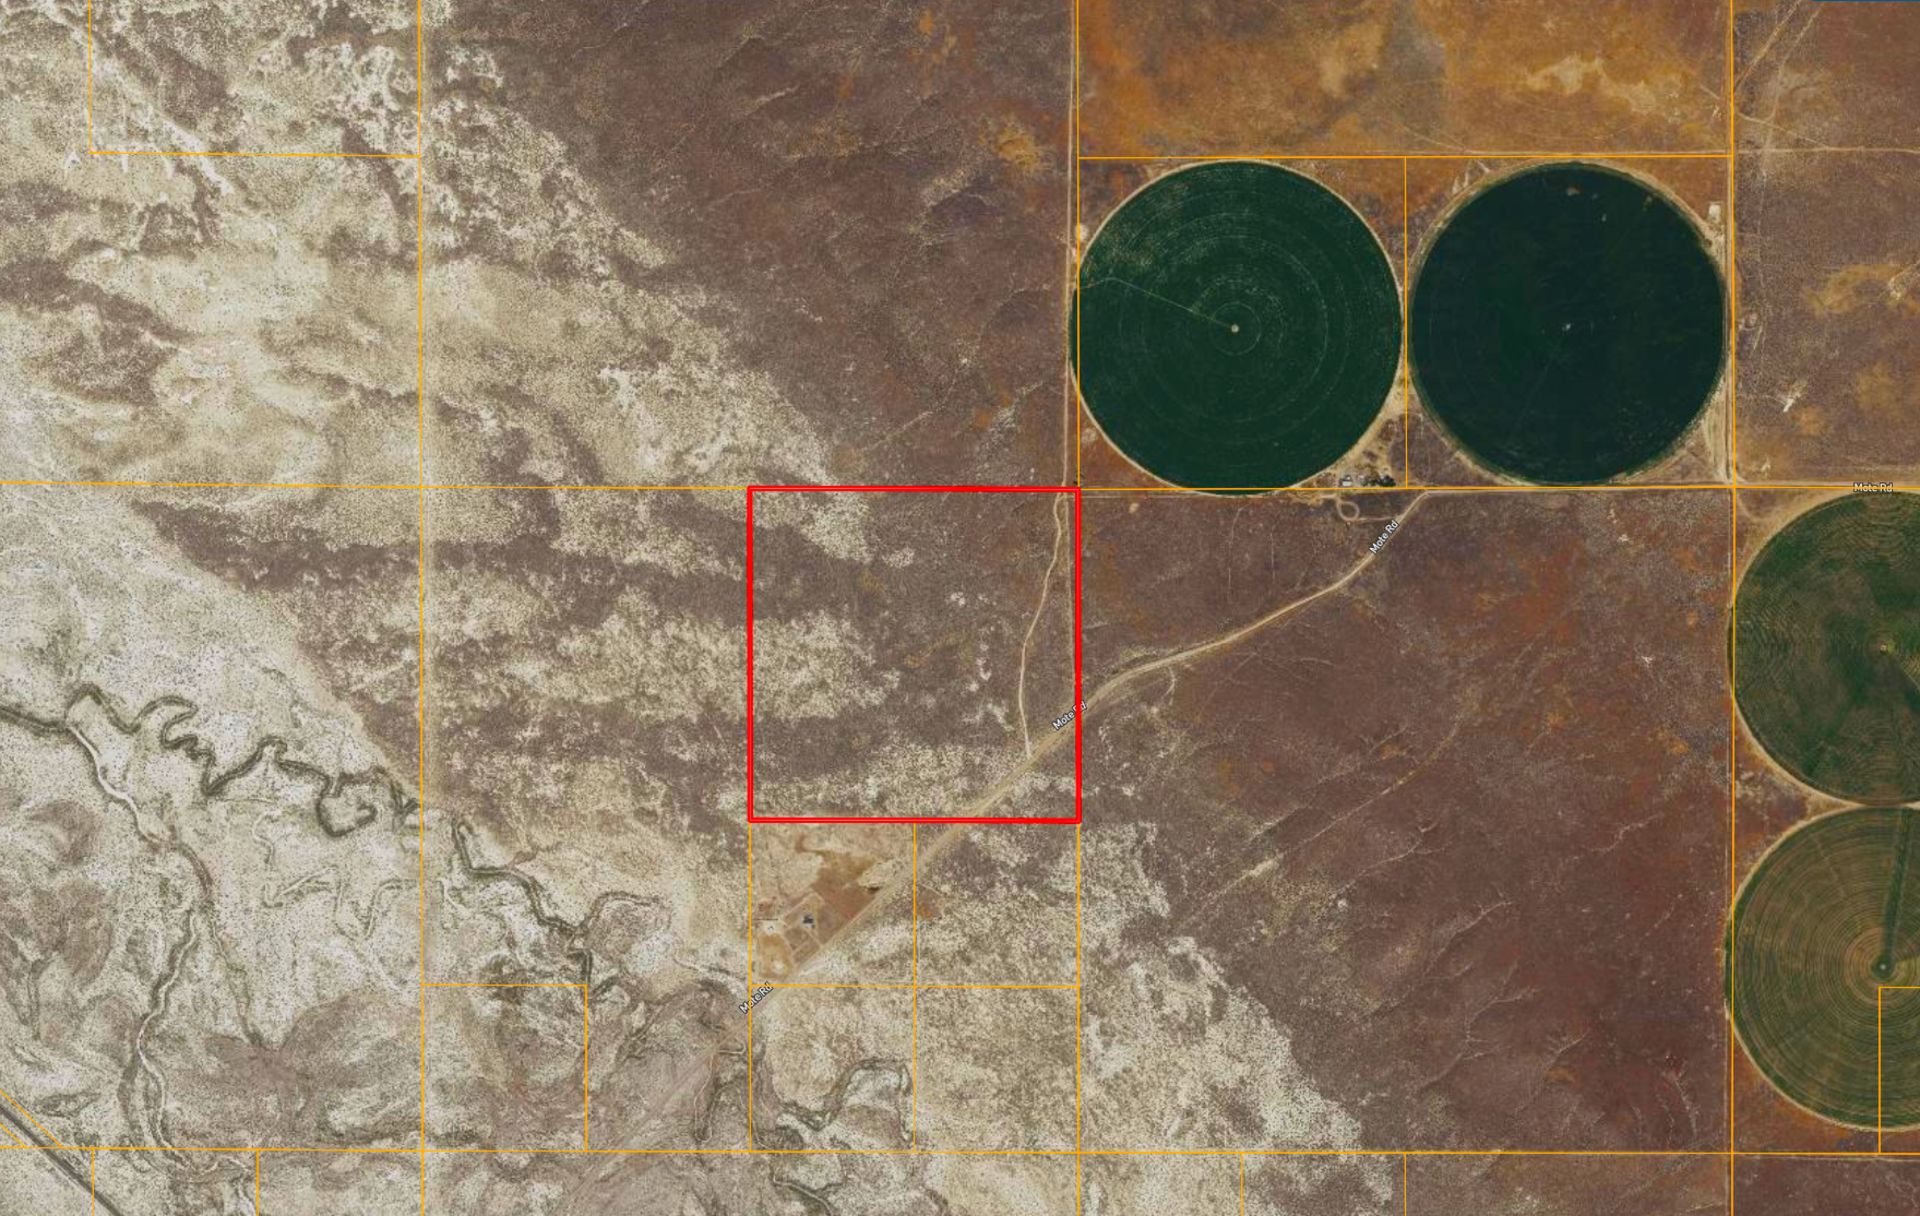 160 Acres Amidst Majestic Mountains in Lander County, Nevada! BIDDING IS PER ACRE! - Image 9 of 16